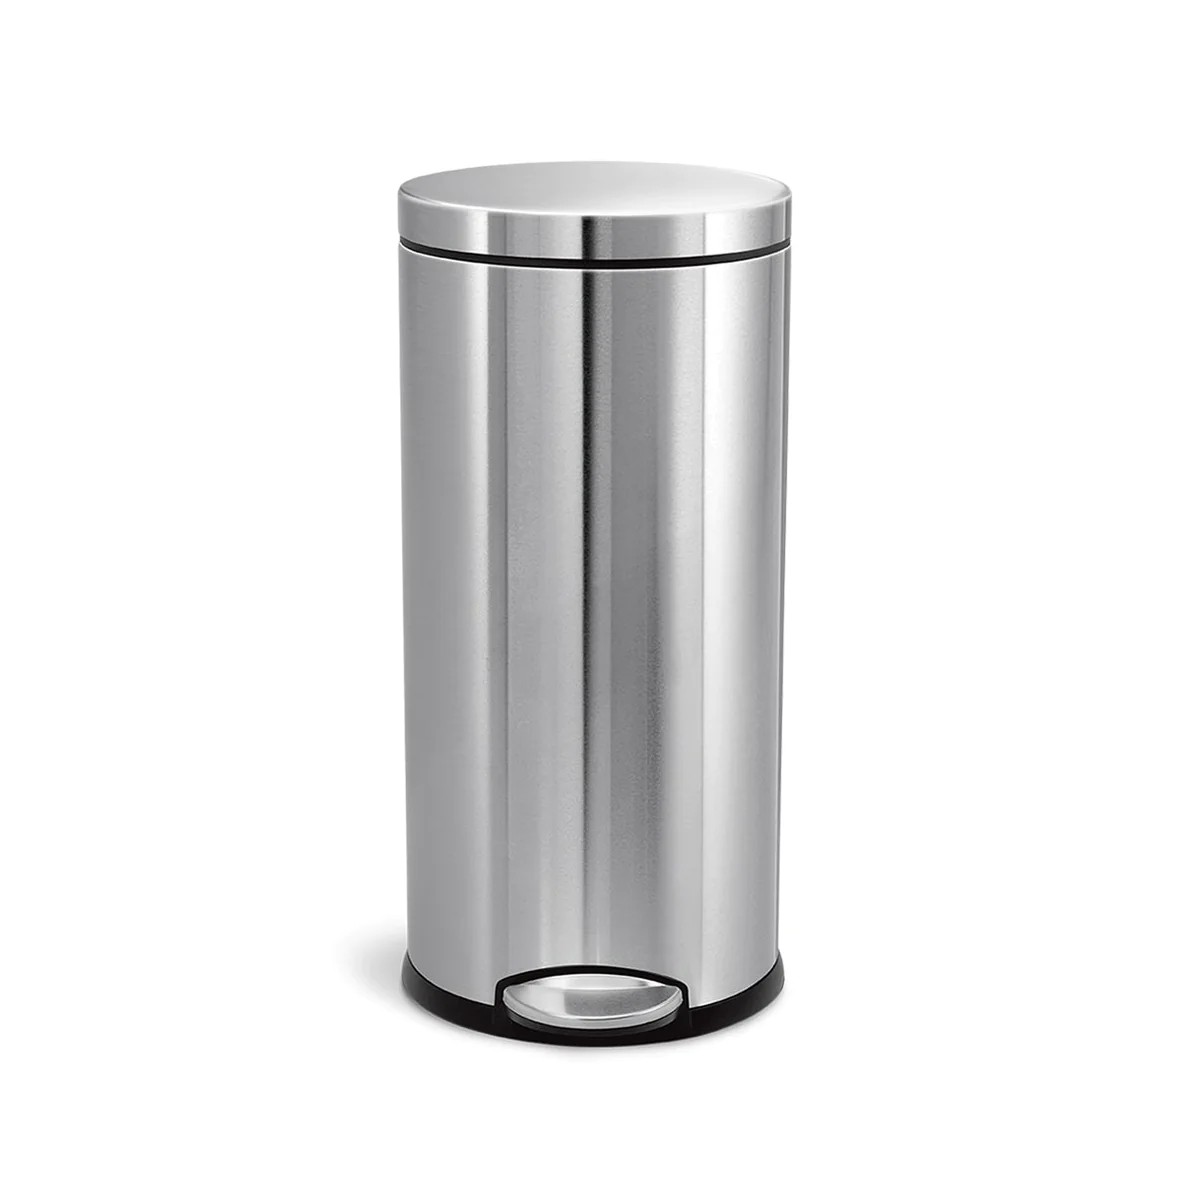 Simplehuman Trash Can Review: Expensive But Worth the Price